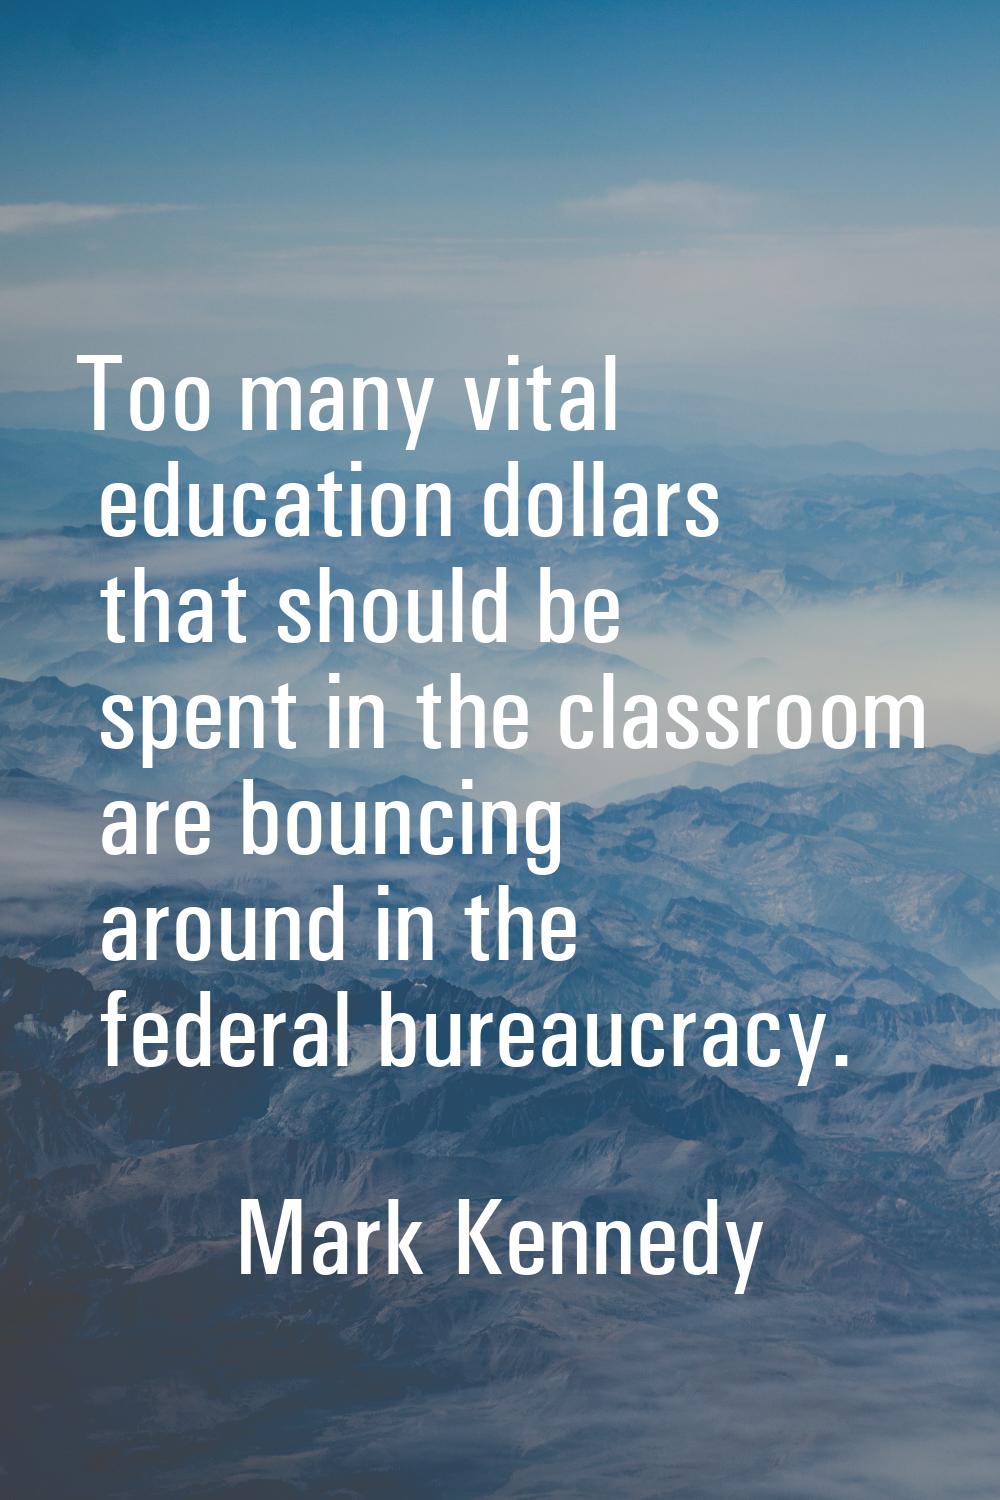 Too many vital education dollars that should be spent in the classroom are bouncing around in the f